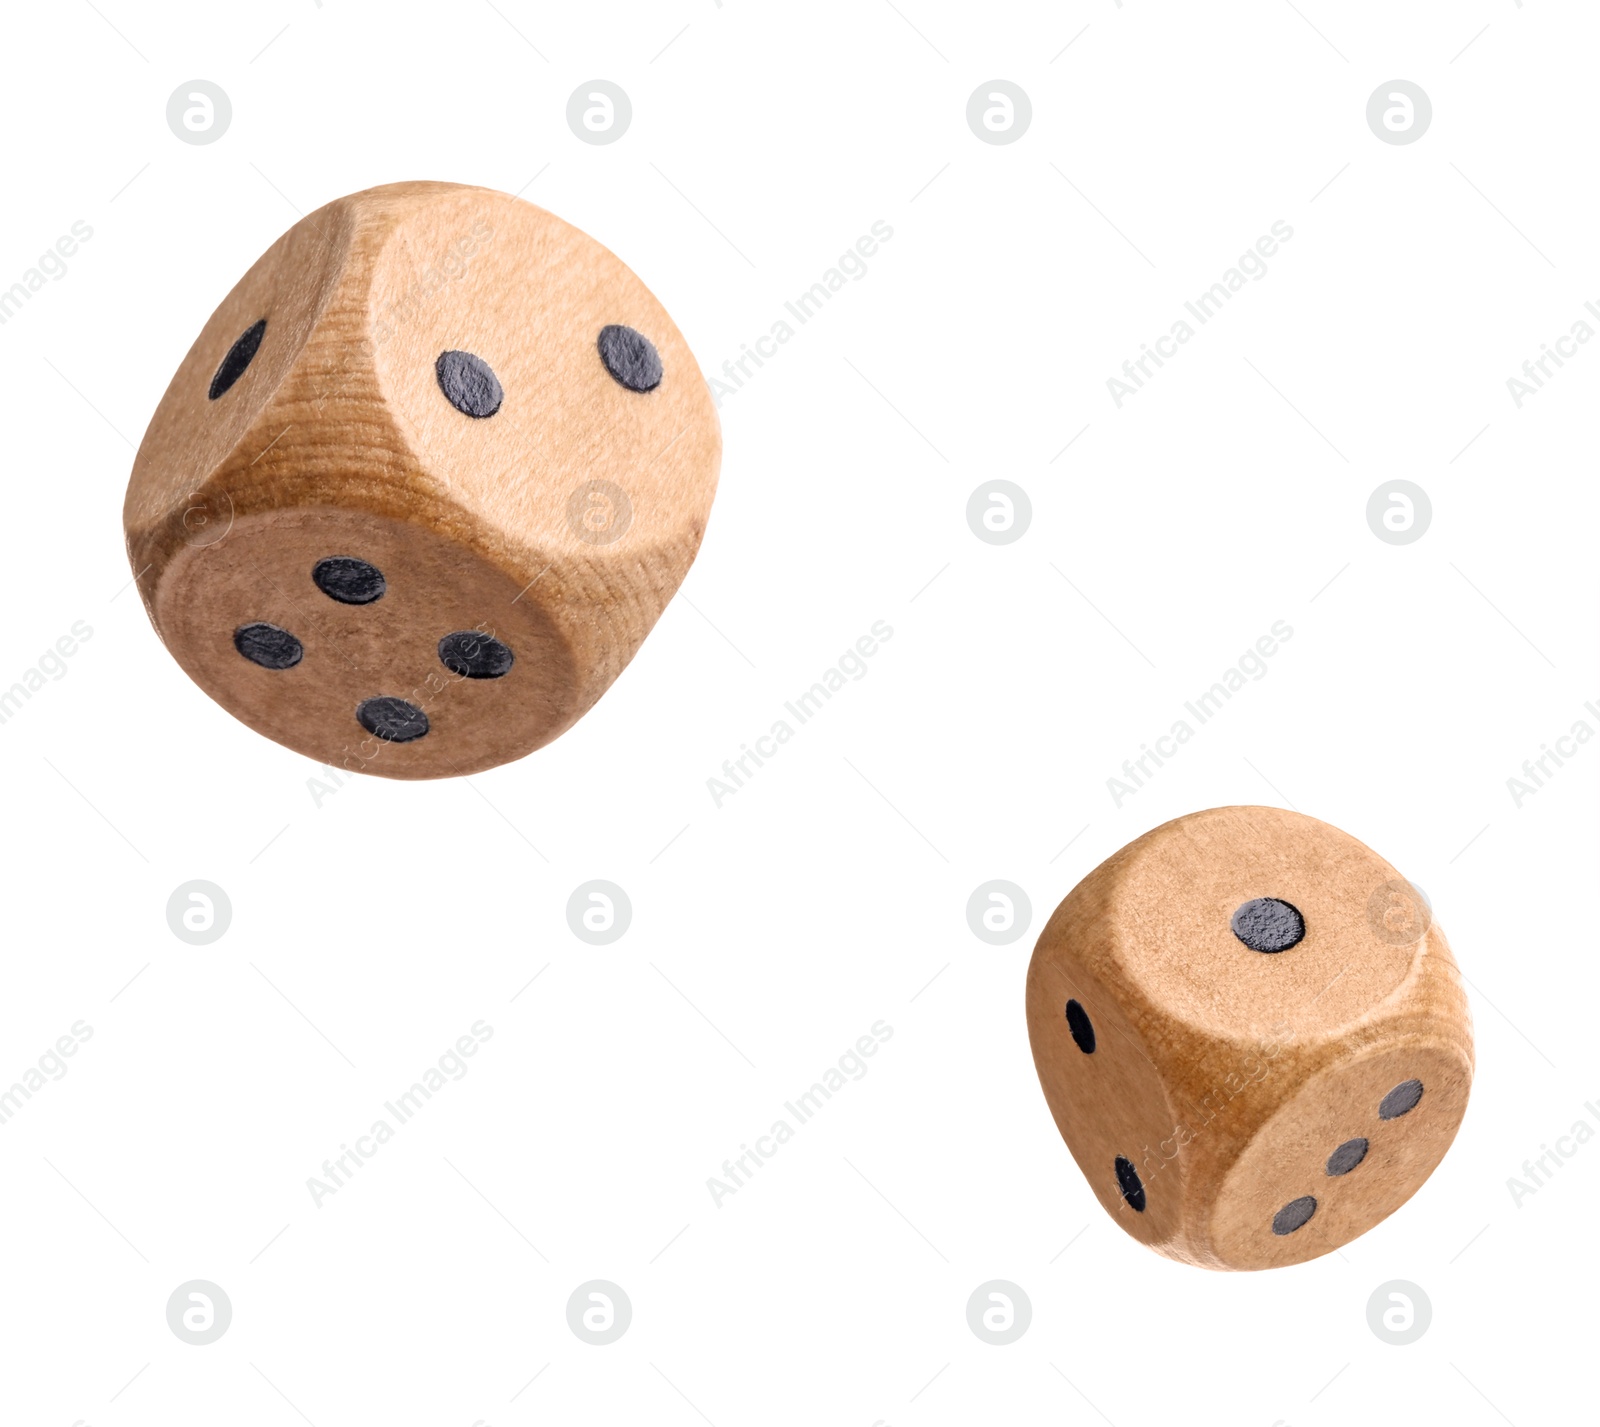 Image of Two wooden dice in air on white background